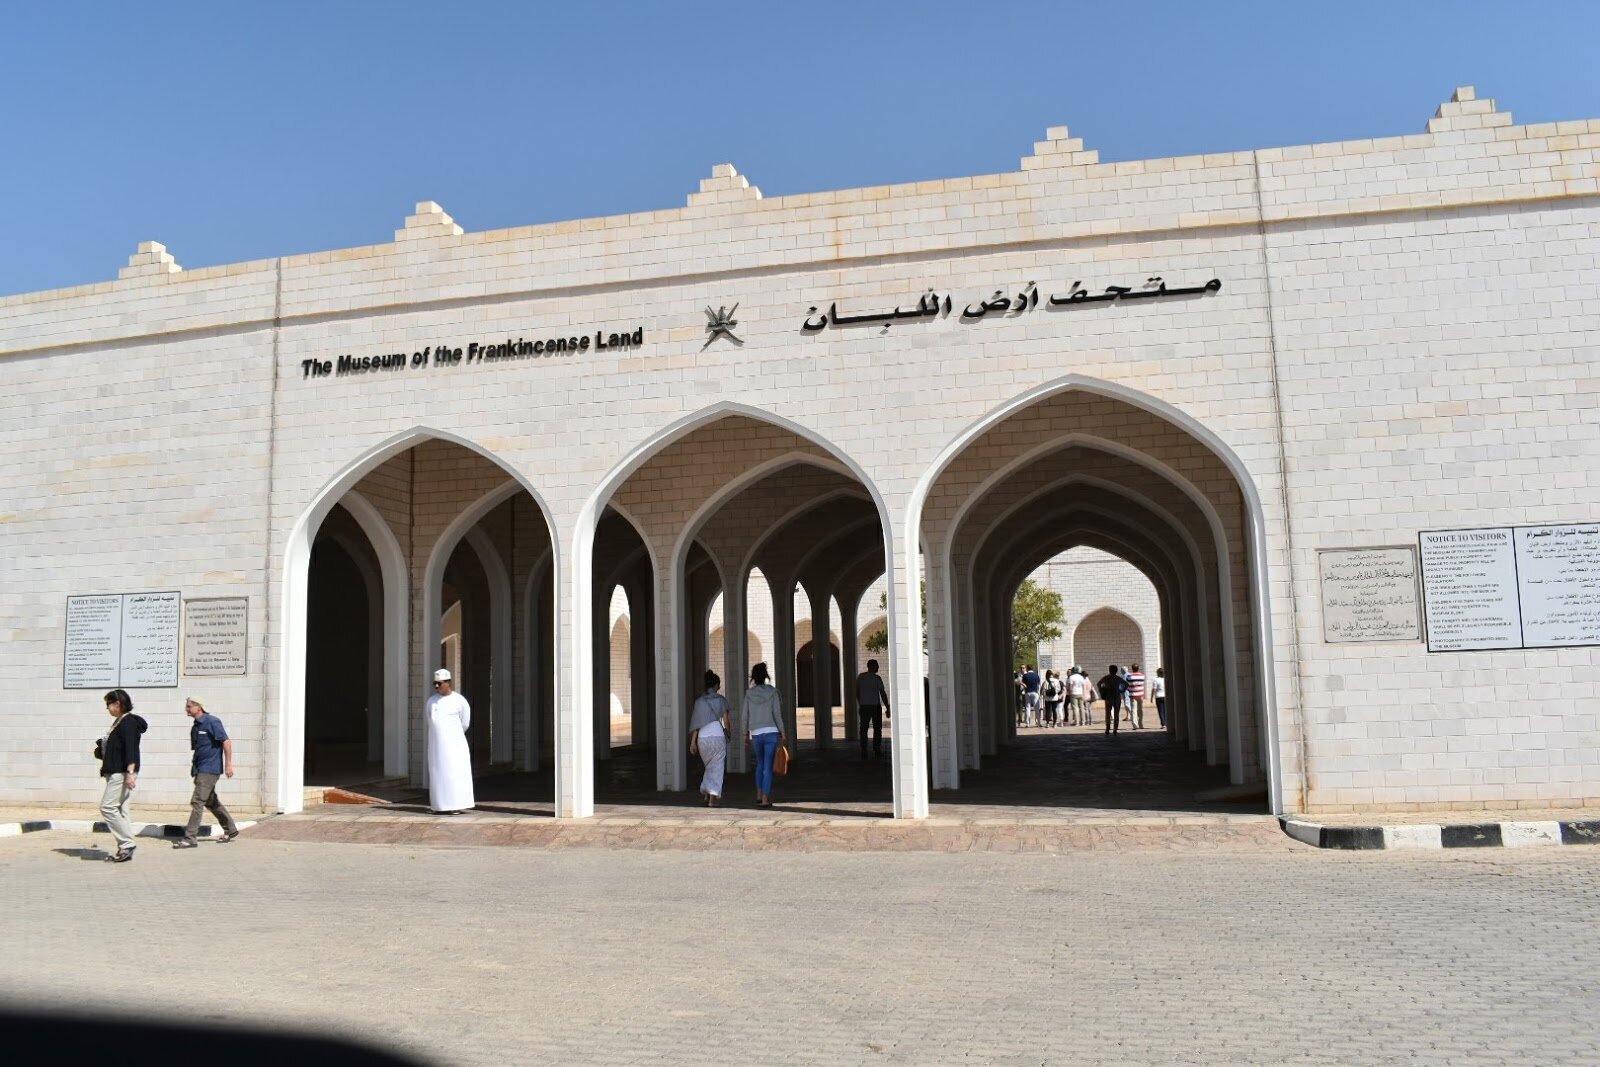 The Museum of the Frankincense Land, a must-see in Salalah, Oman - photo by Jozef Straka